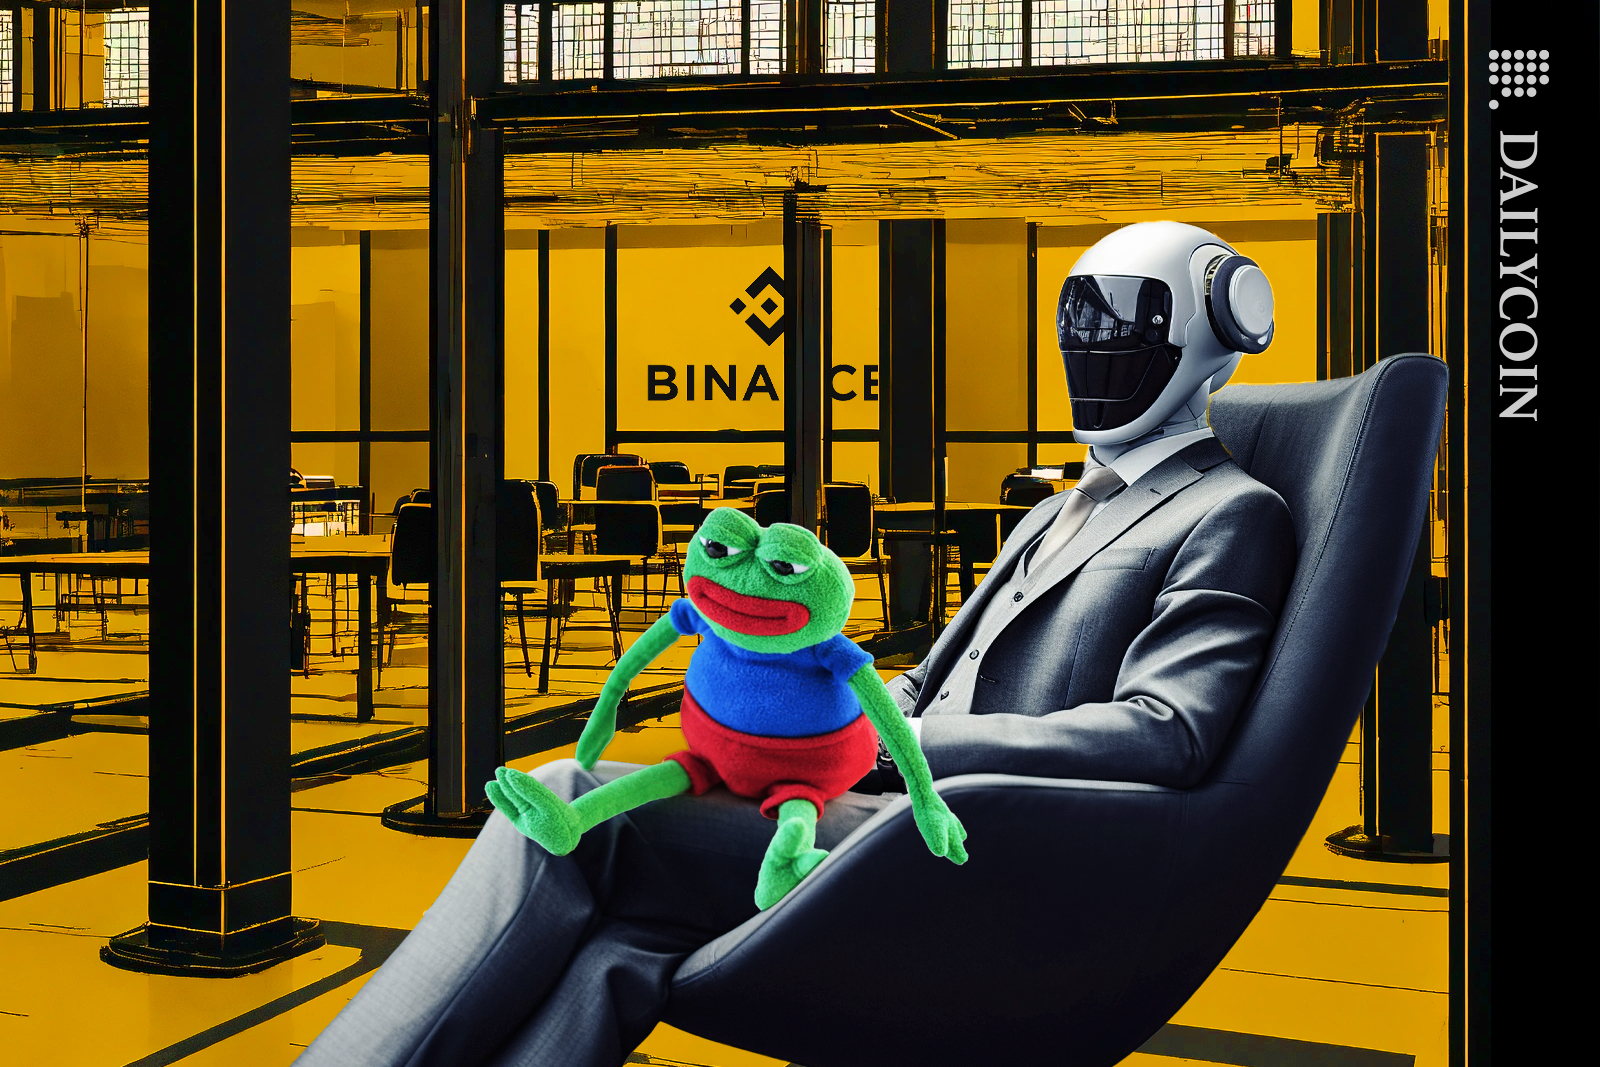 PEPE sitting at Binance office with his developer smilling.